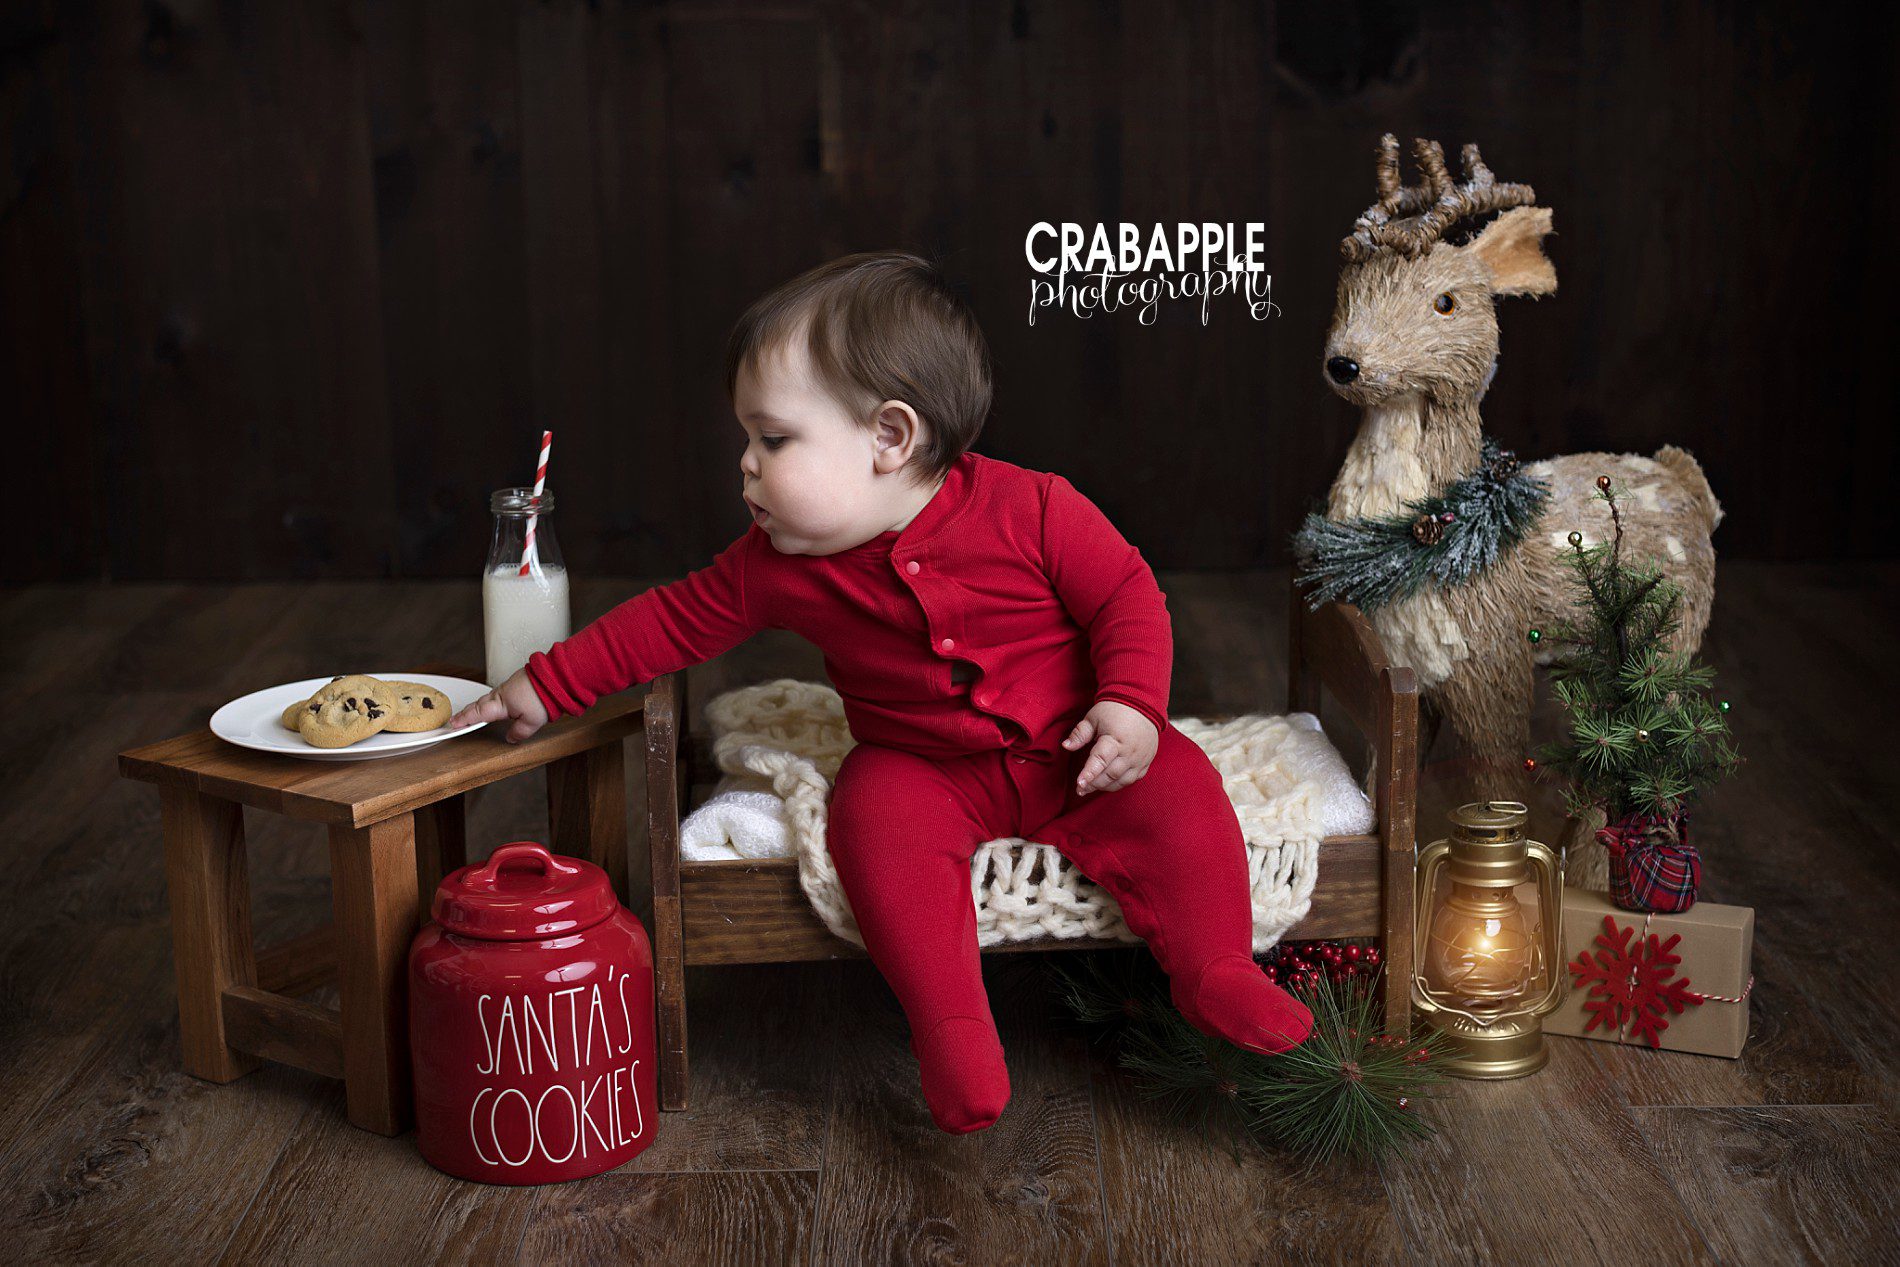 Christmas themed baby photos using a cookie jar that says "Santa's Cookies", milk, cookies, and other small props.